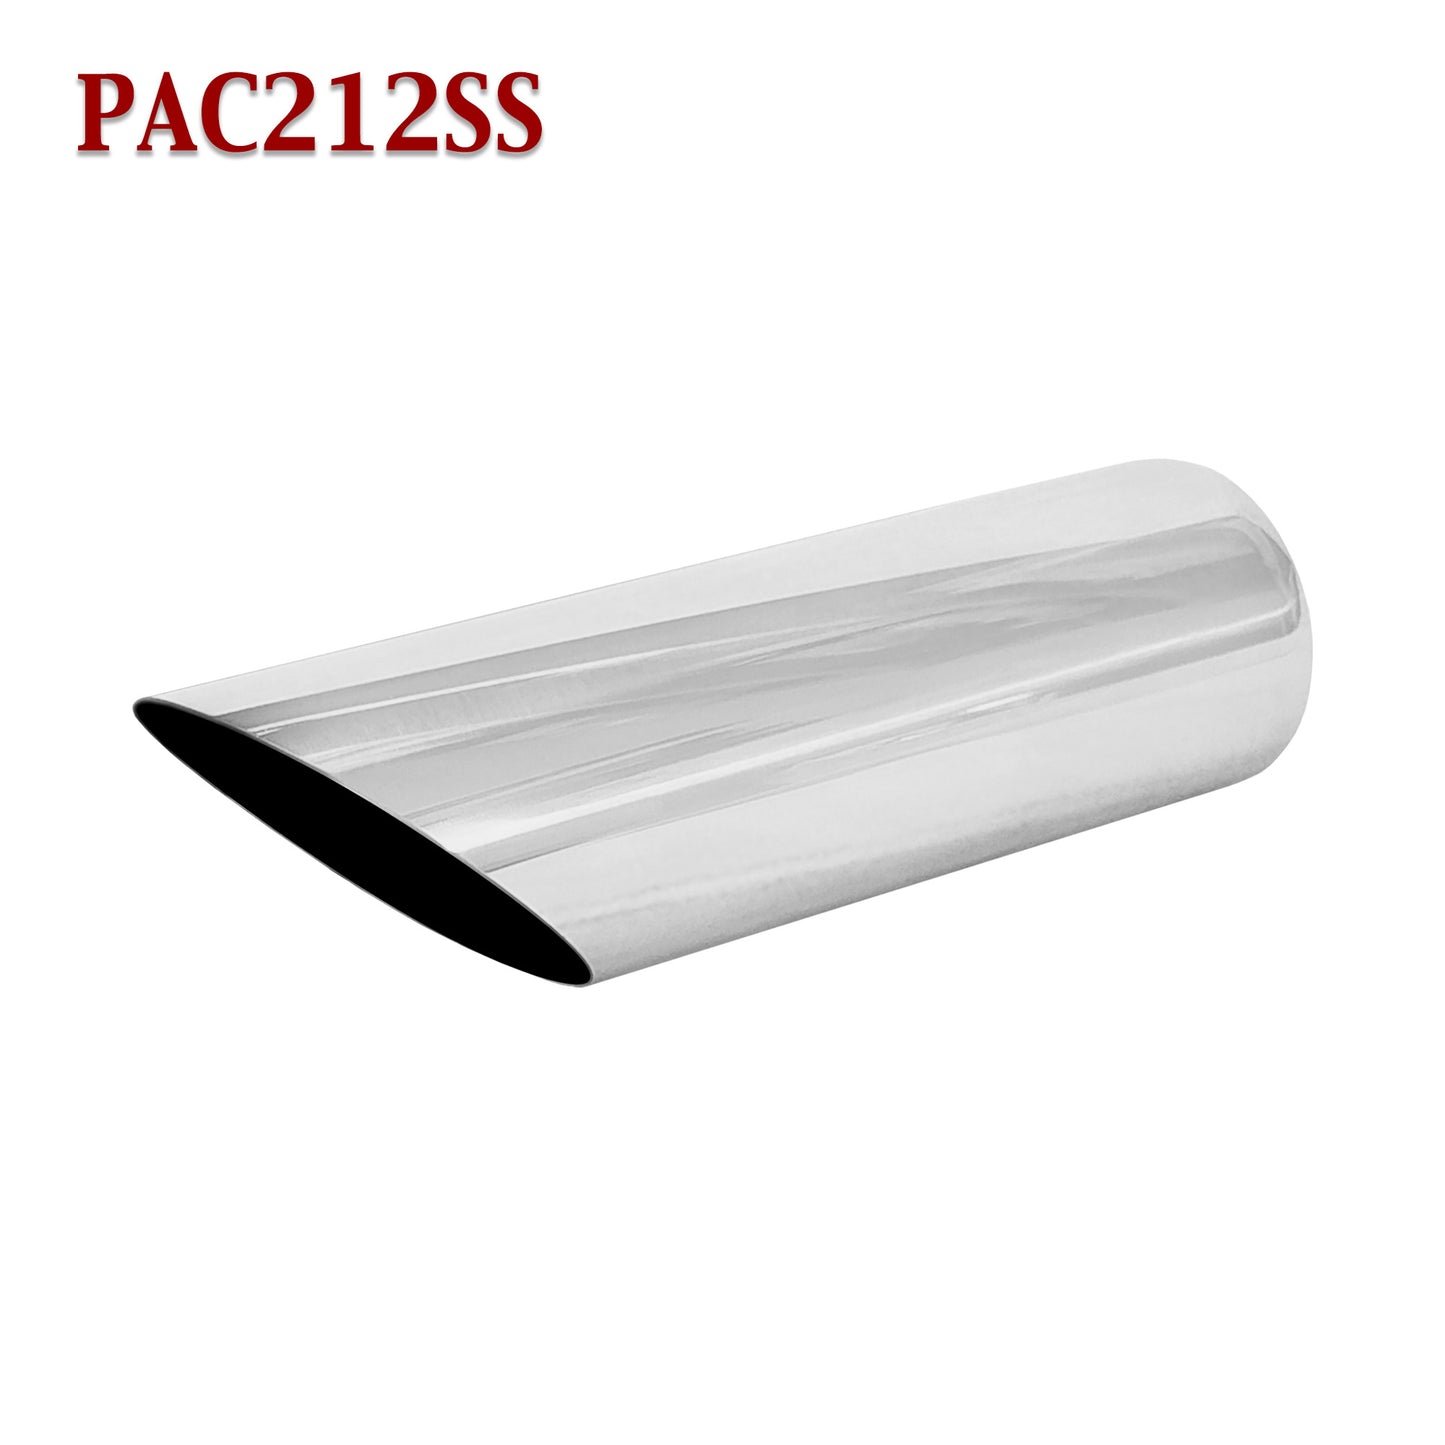 PAC212SS 2.5" Stainless Round Exhaust Tip 2 1/2" Inlet / 3" Outlet / 9" Long